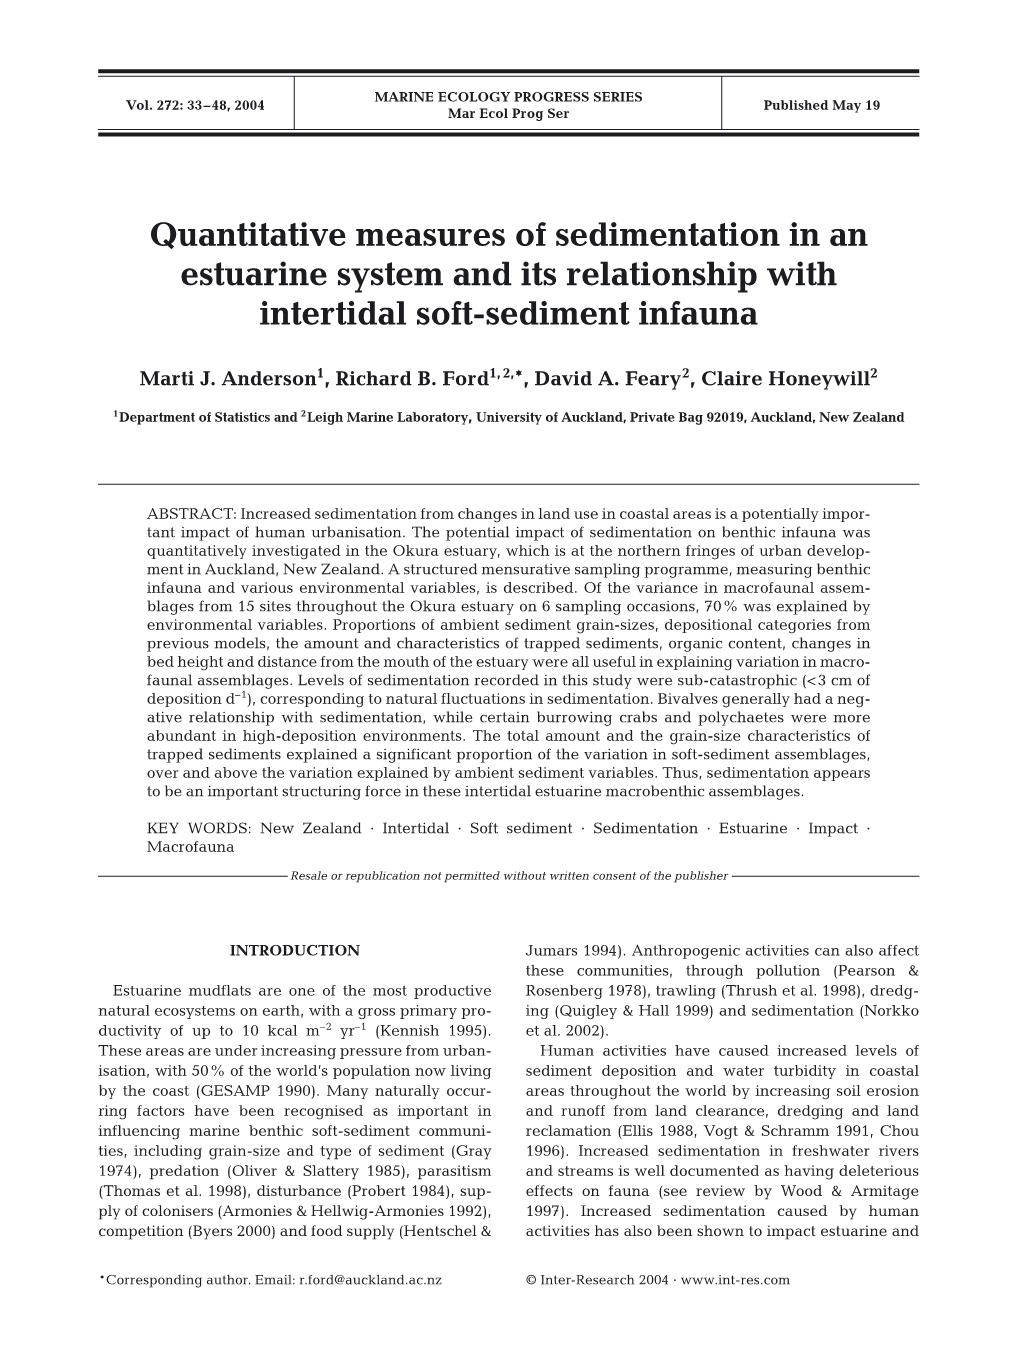 Quantitative Measures of Sedimentation in an Estuarine System and Its Relationship with Intertidal Soft-Sediment Infauna